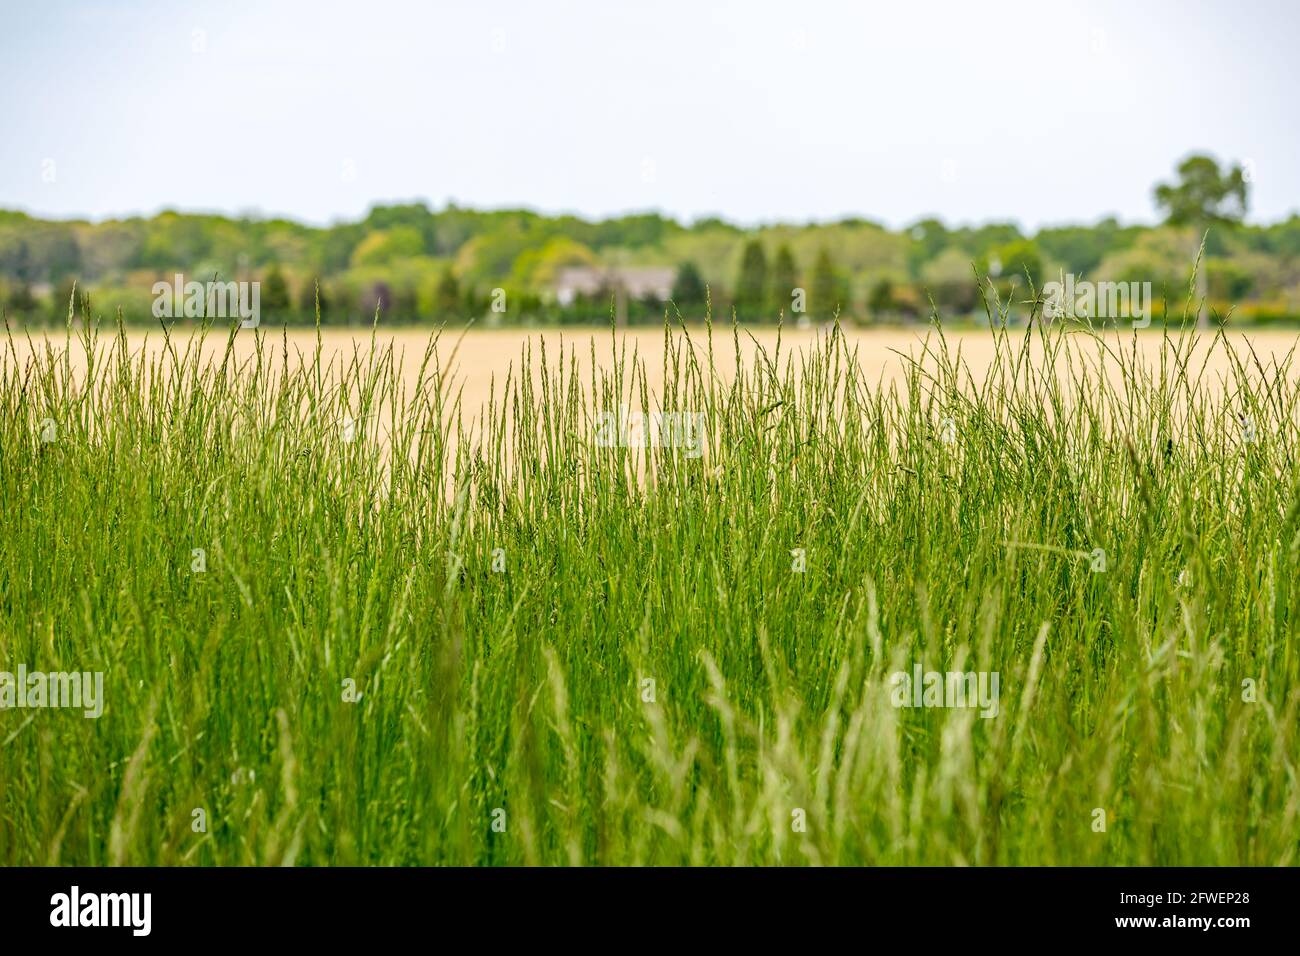 background consisting of grass, fields and distant trees Stock Photo